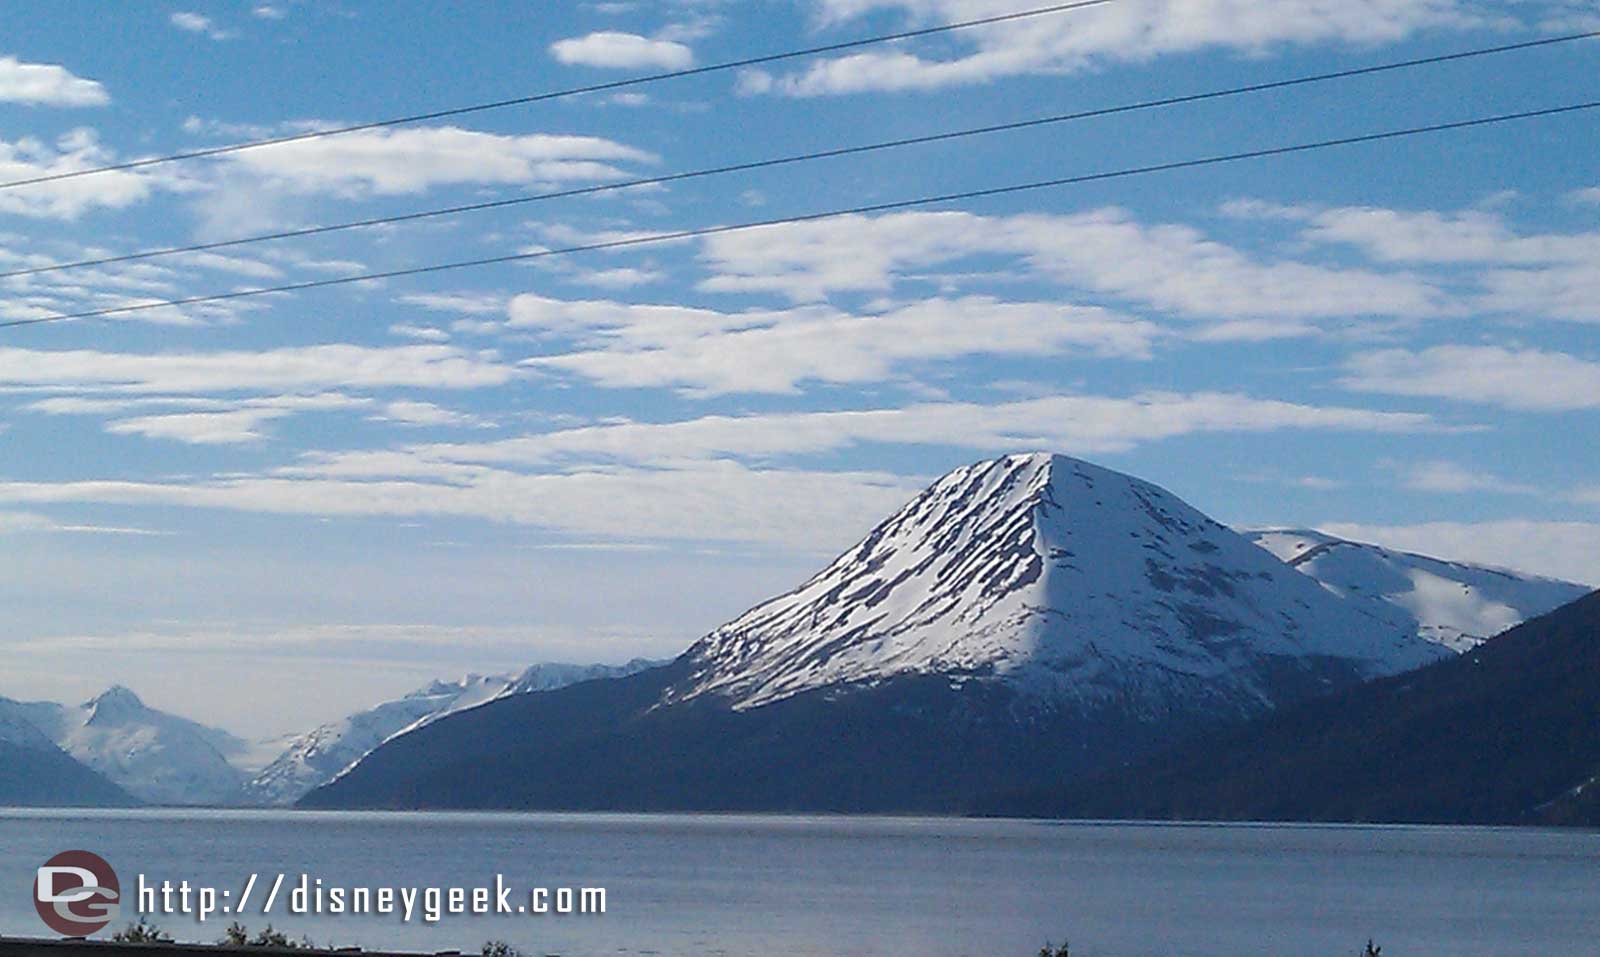 From onboard the train I missed the name of the mountain Alaska